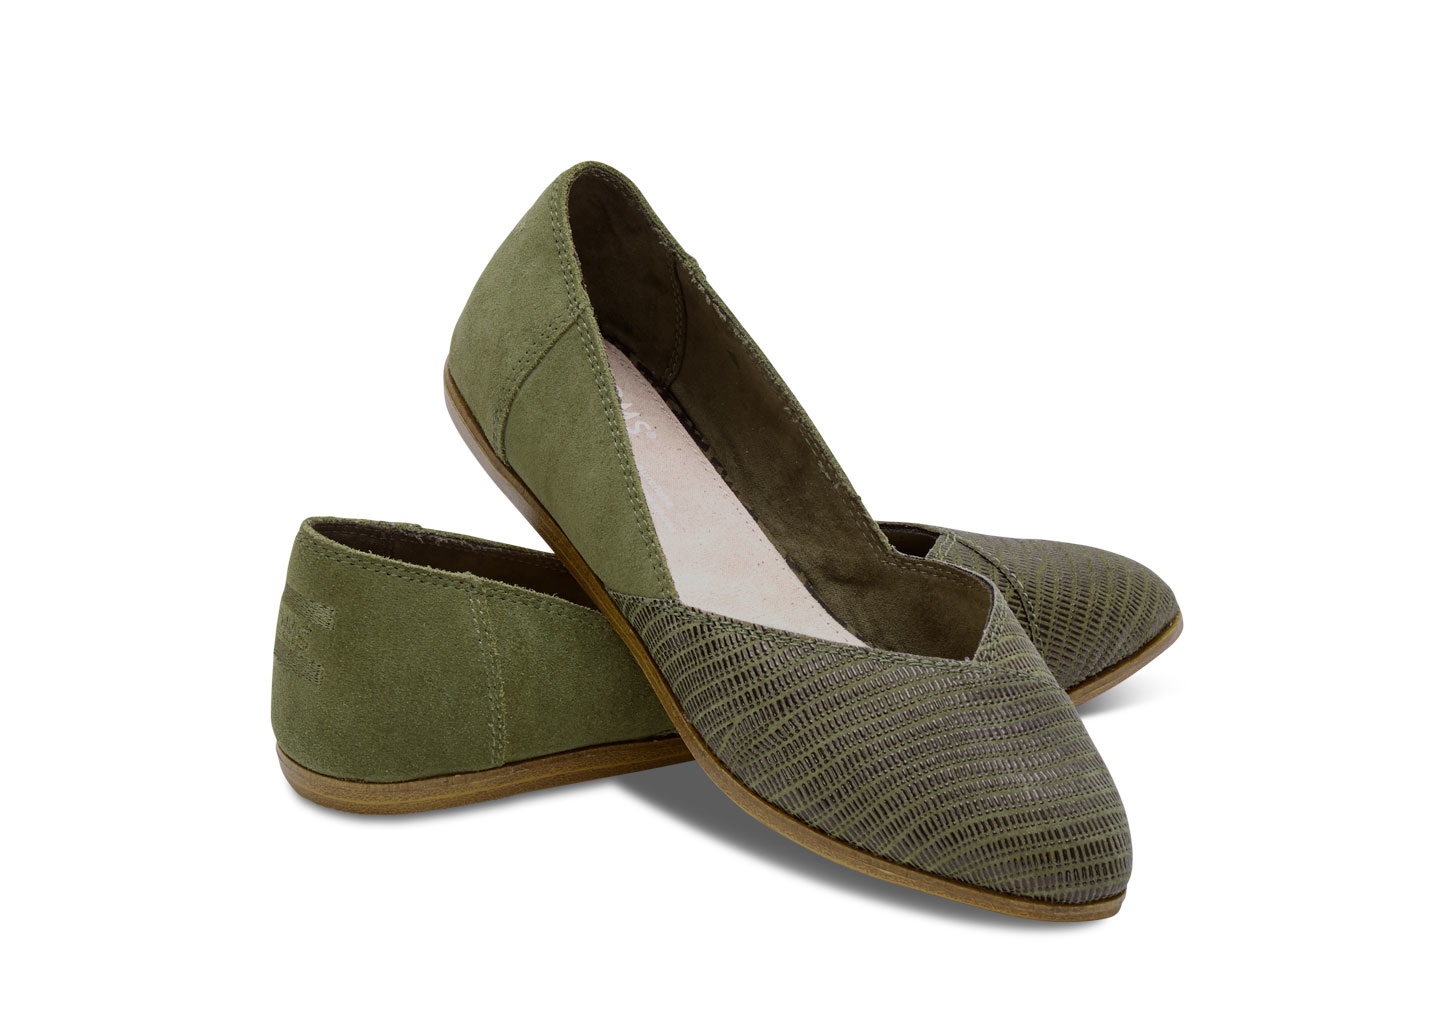 Toms Tarmac Olive Tarmac Olive Suede Emboss Womens Jutti Flats Green Product 2 836771406 Normal 